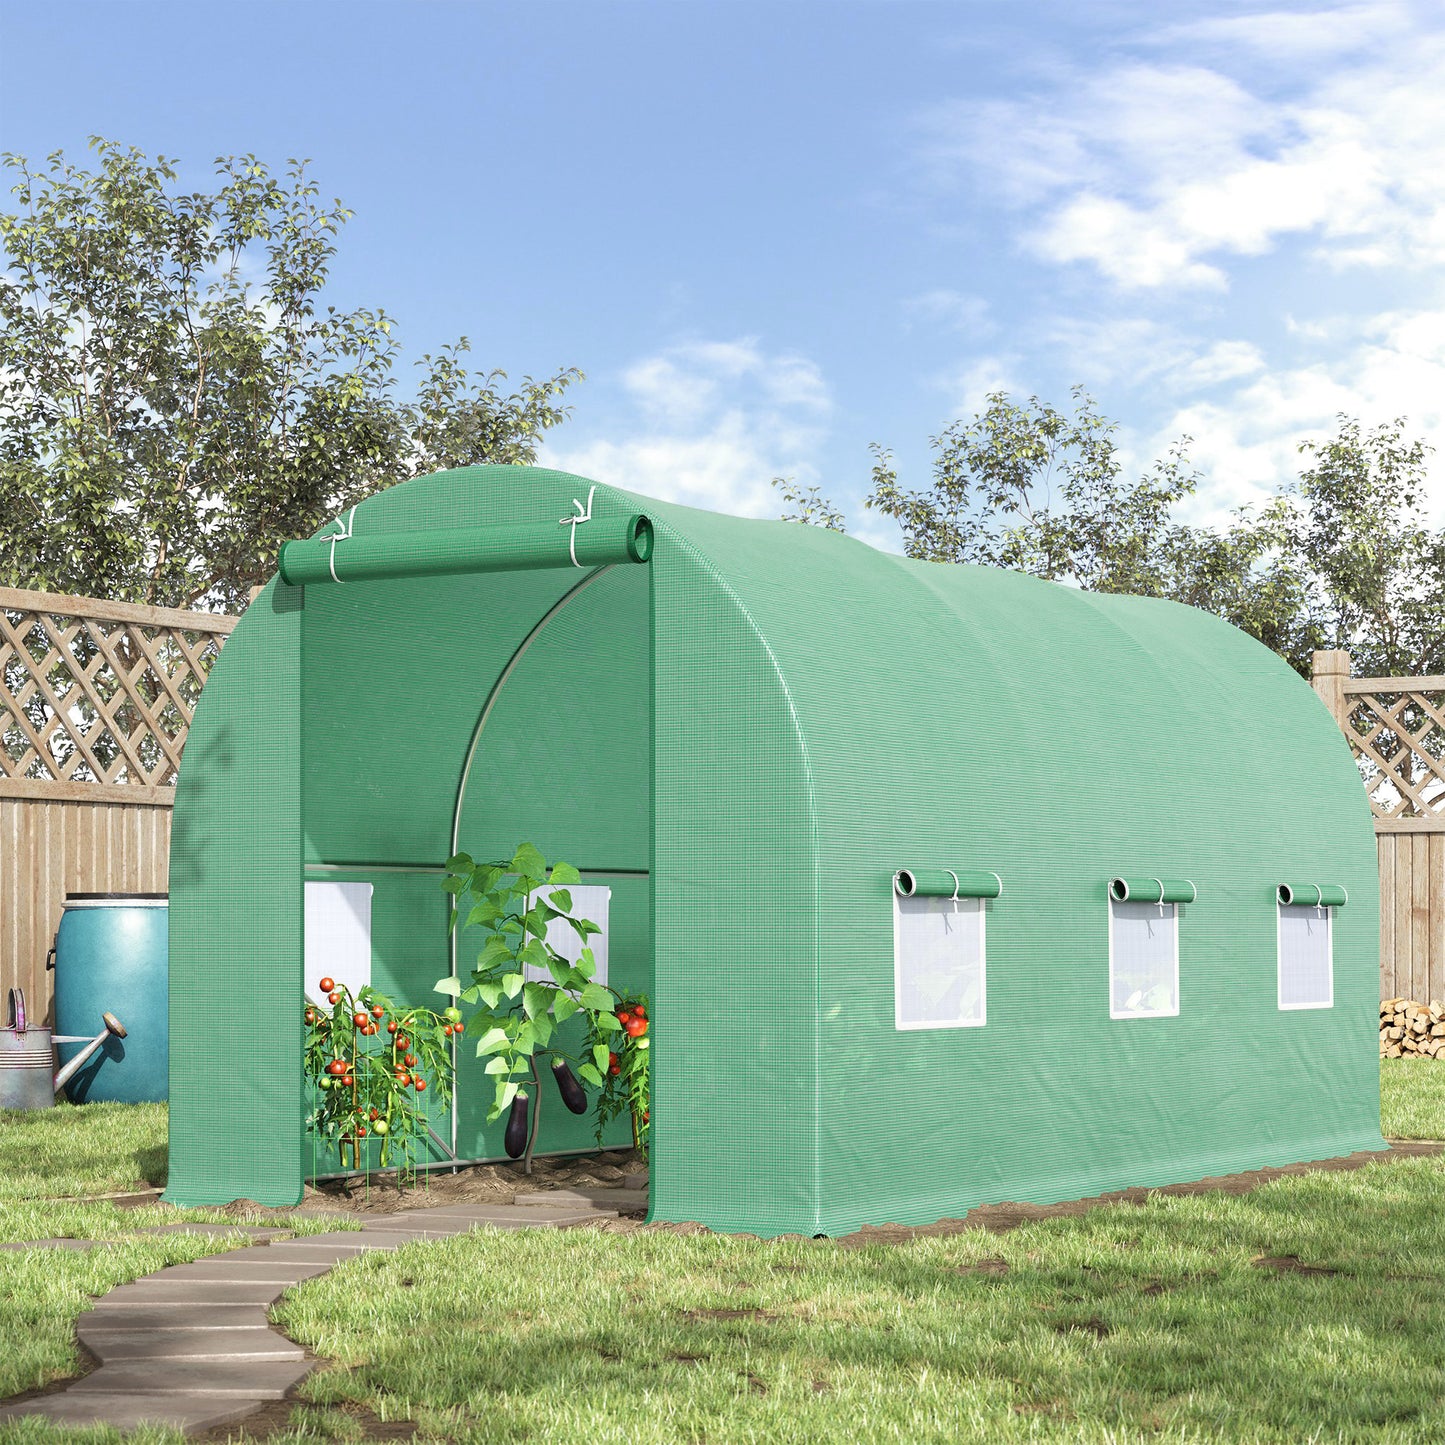 Outsunny Walk-in Greenhouse: Tunnel Design with Door & Ventilation Window, 4.5m x 2m x 2m, Green